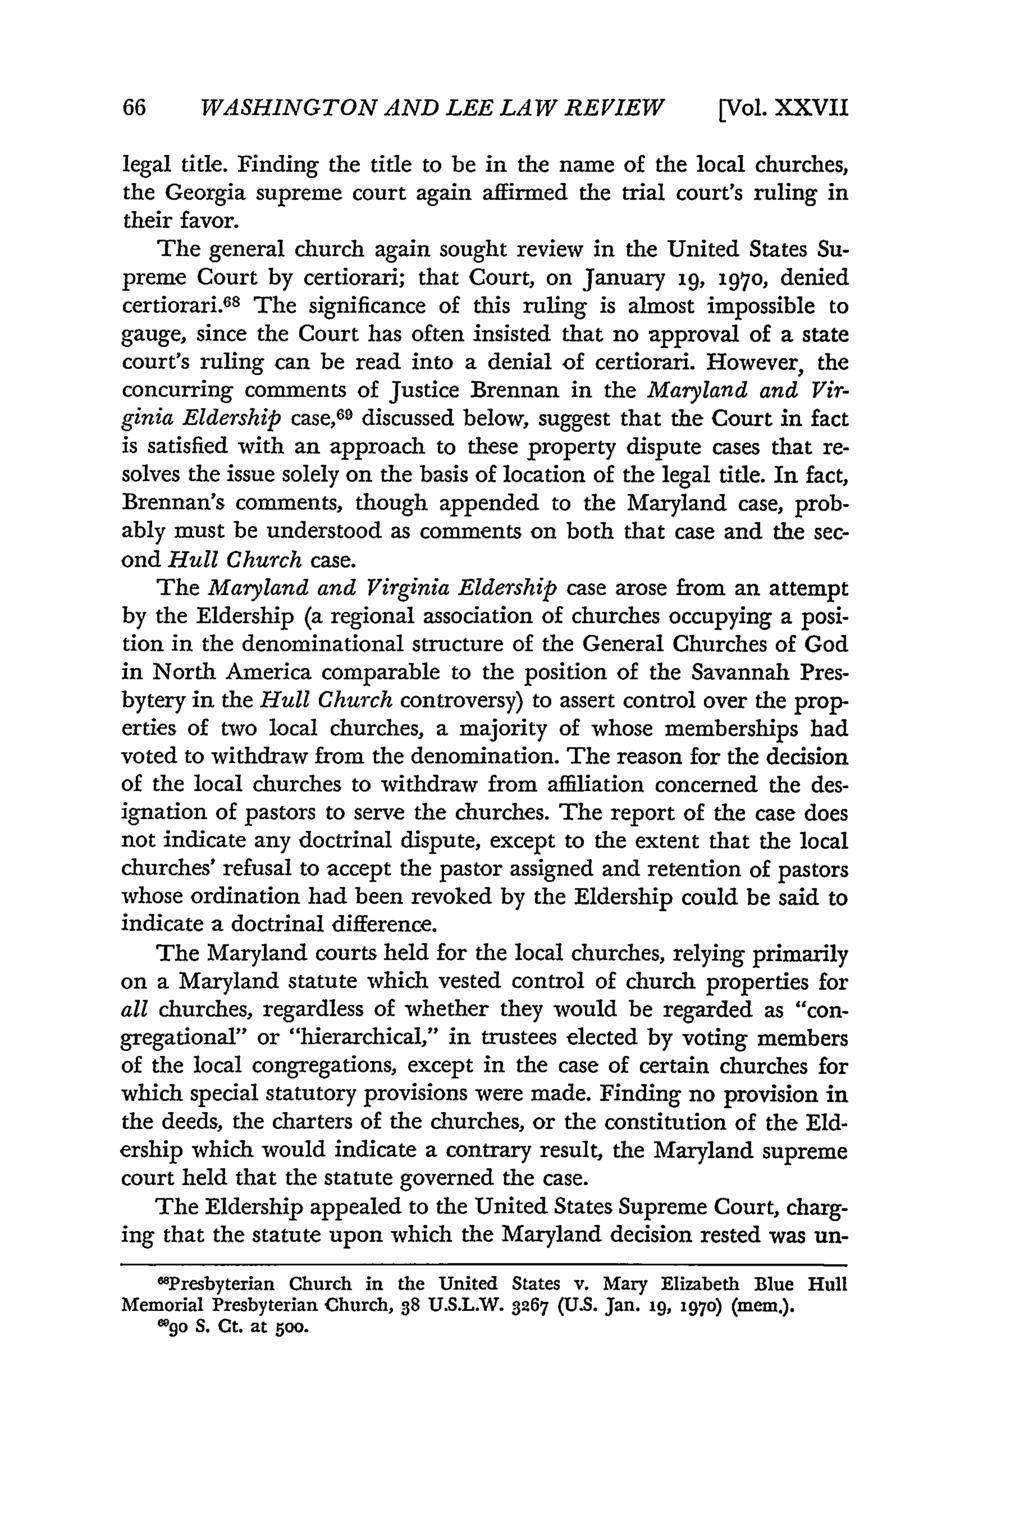 66 WASHINGTON AND LEE LAW REVIEW [Vol. XXVII legal title. Finding the title to be in the name of the local churches, the Georgia supreme court again affirmed the trial court's ruling in their favor.